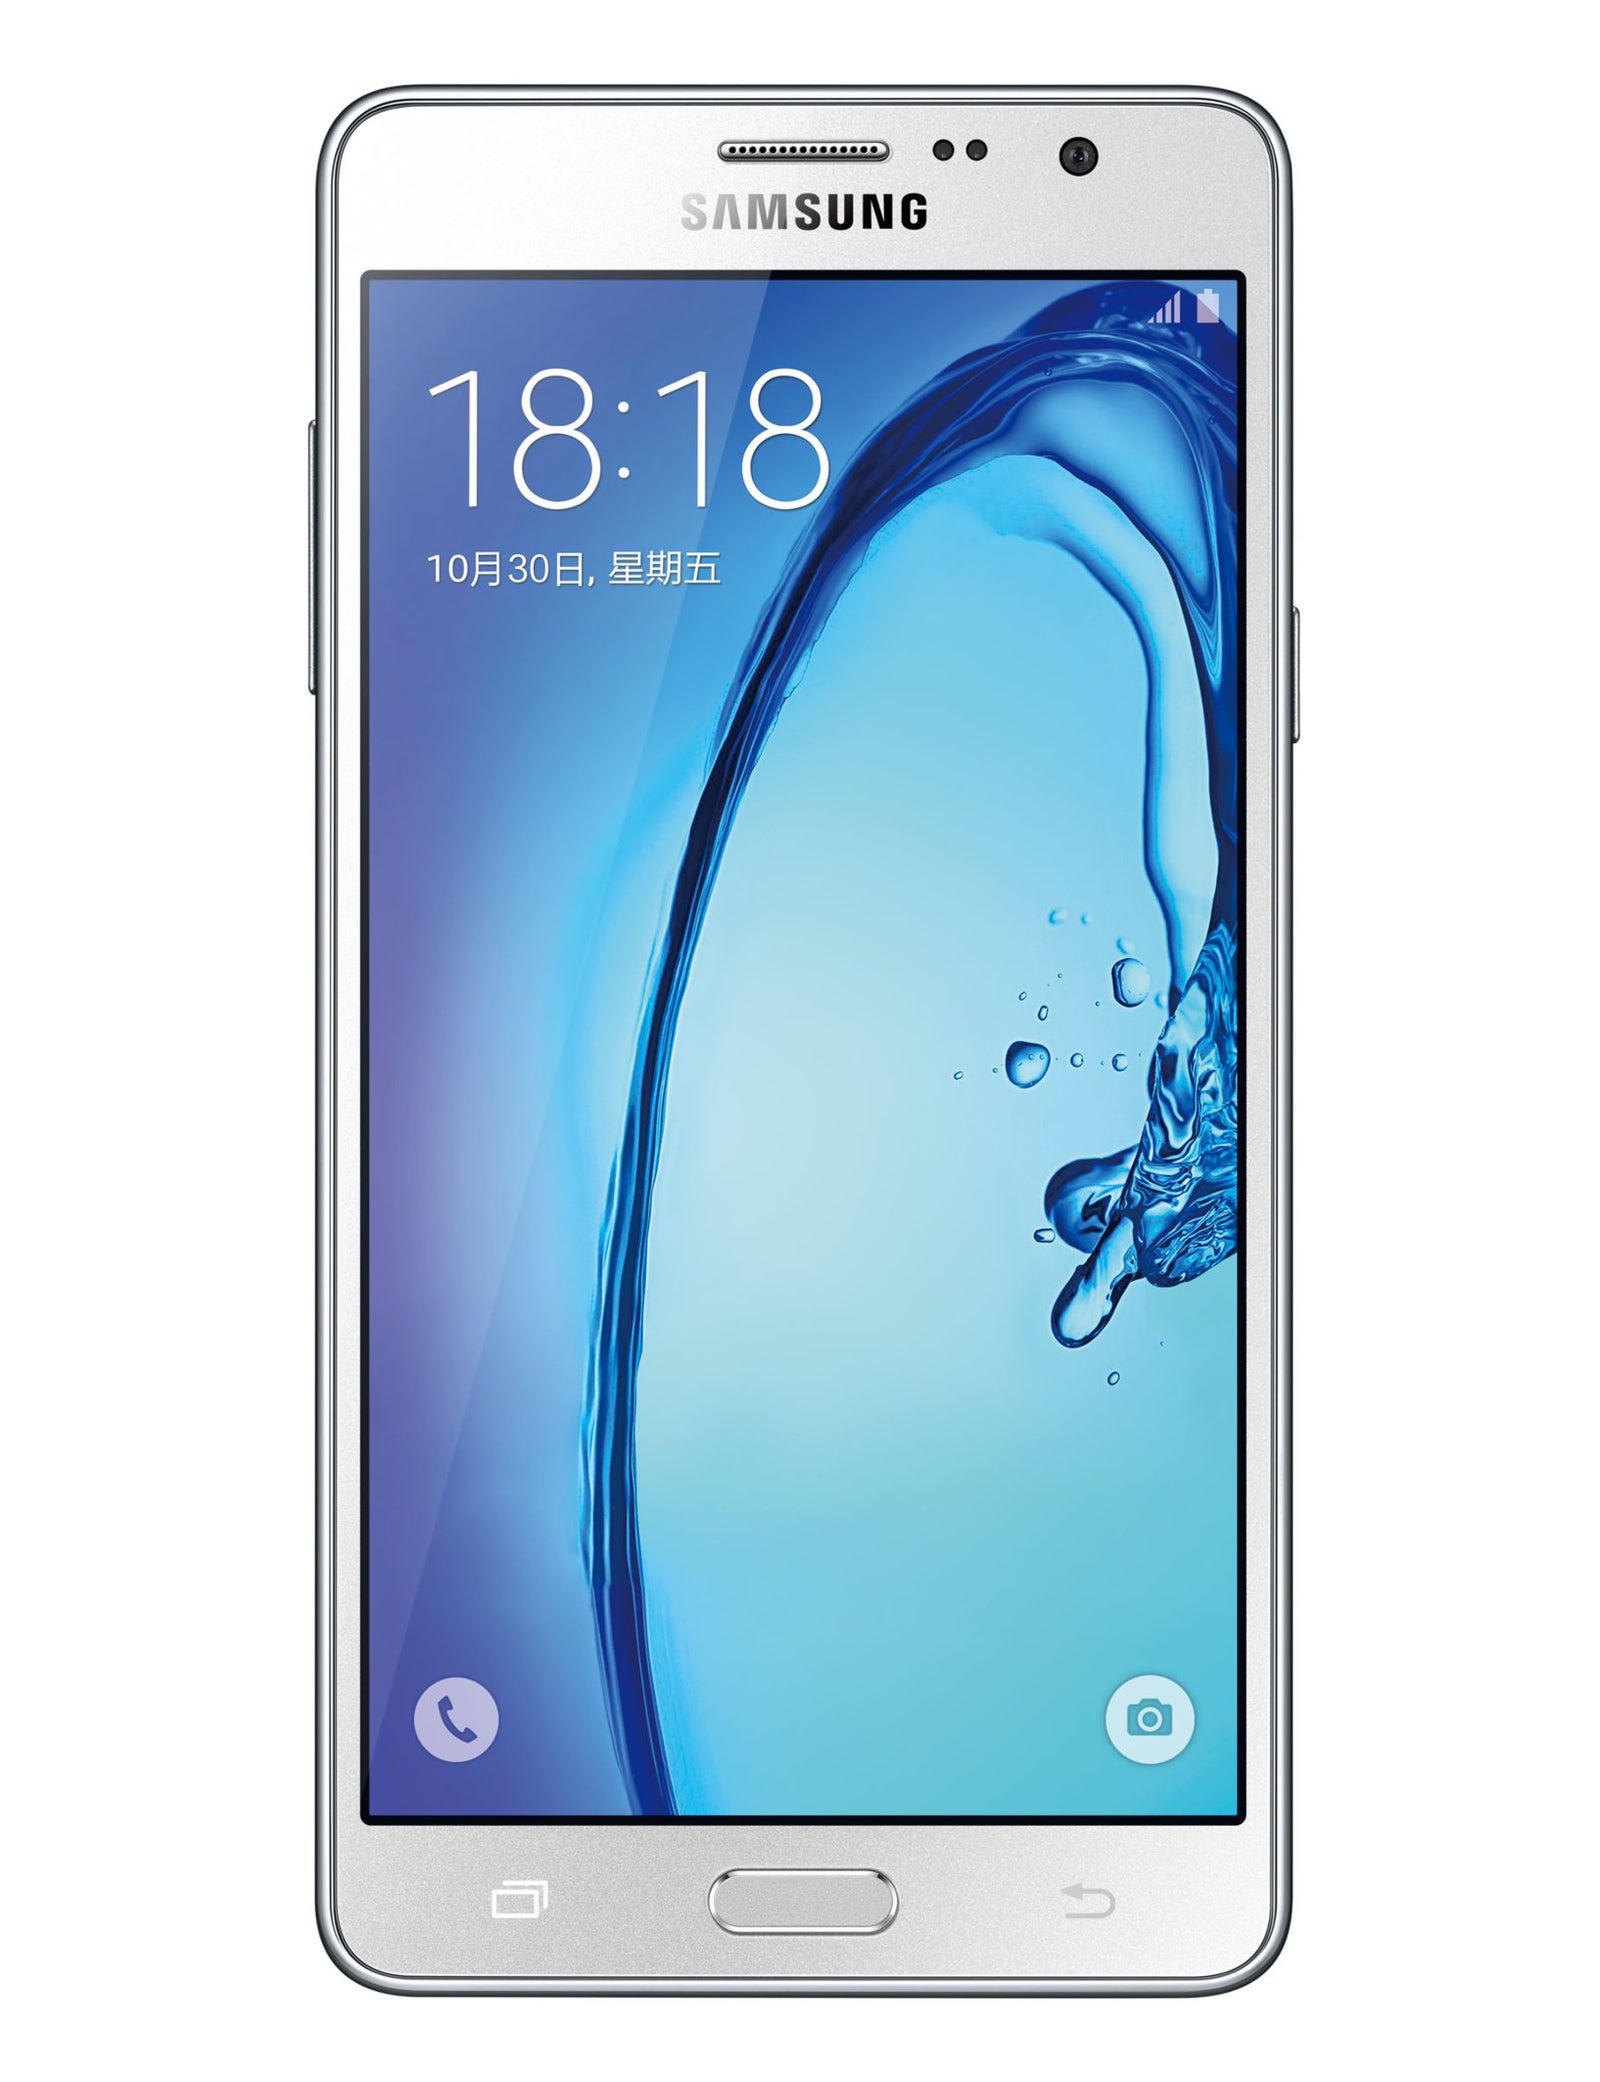 Samsung Galaxy On7 (2016) SM-G6100 Price Reviews, Specifications